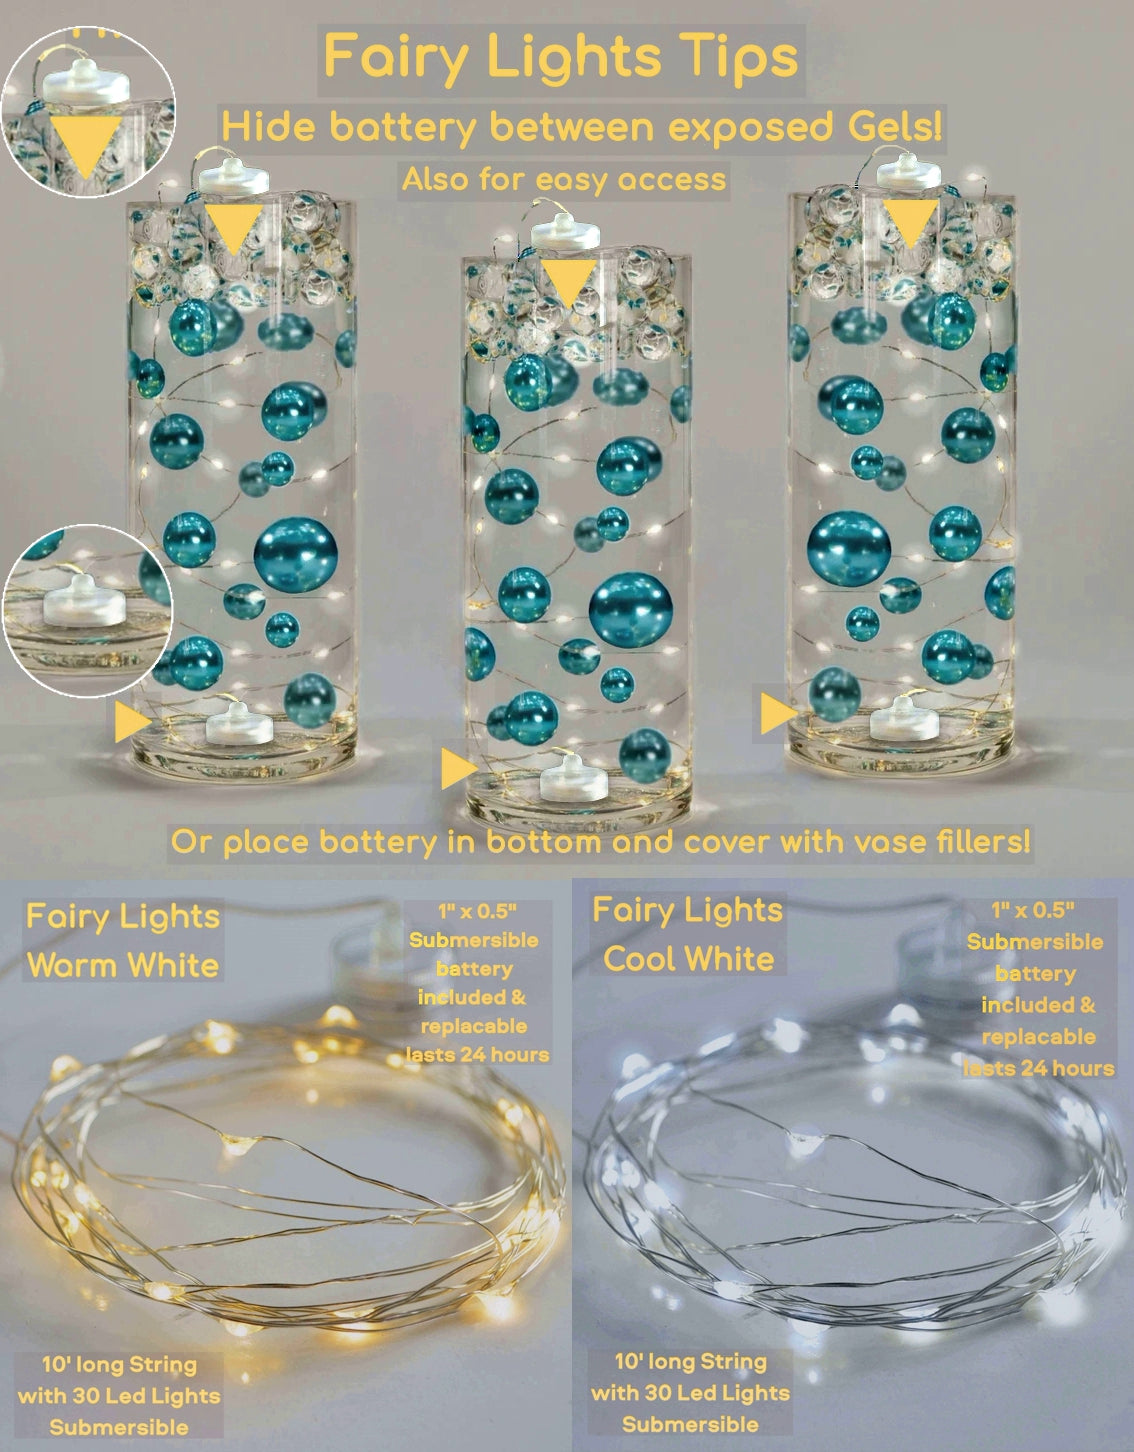 200 Floating Ivory Pearls & White Pearls With Matching Gems-Shiny-Jumbo Sizes-Fills 4 Gallons of Floating Pearls/Gems/Transparent Gels For your vases-With Must-Have Transparent Gels Floating Kit-Option: 12 Submersible Fairy Lights Strings